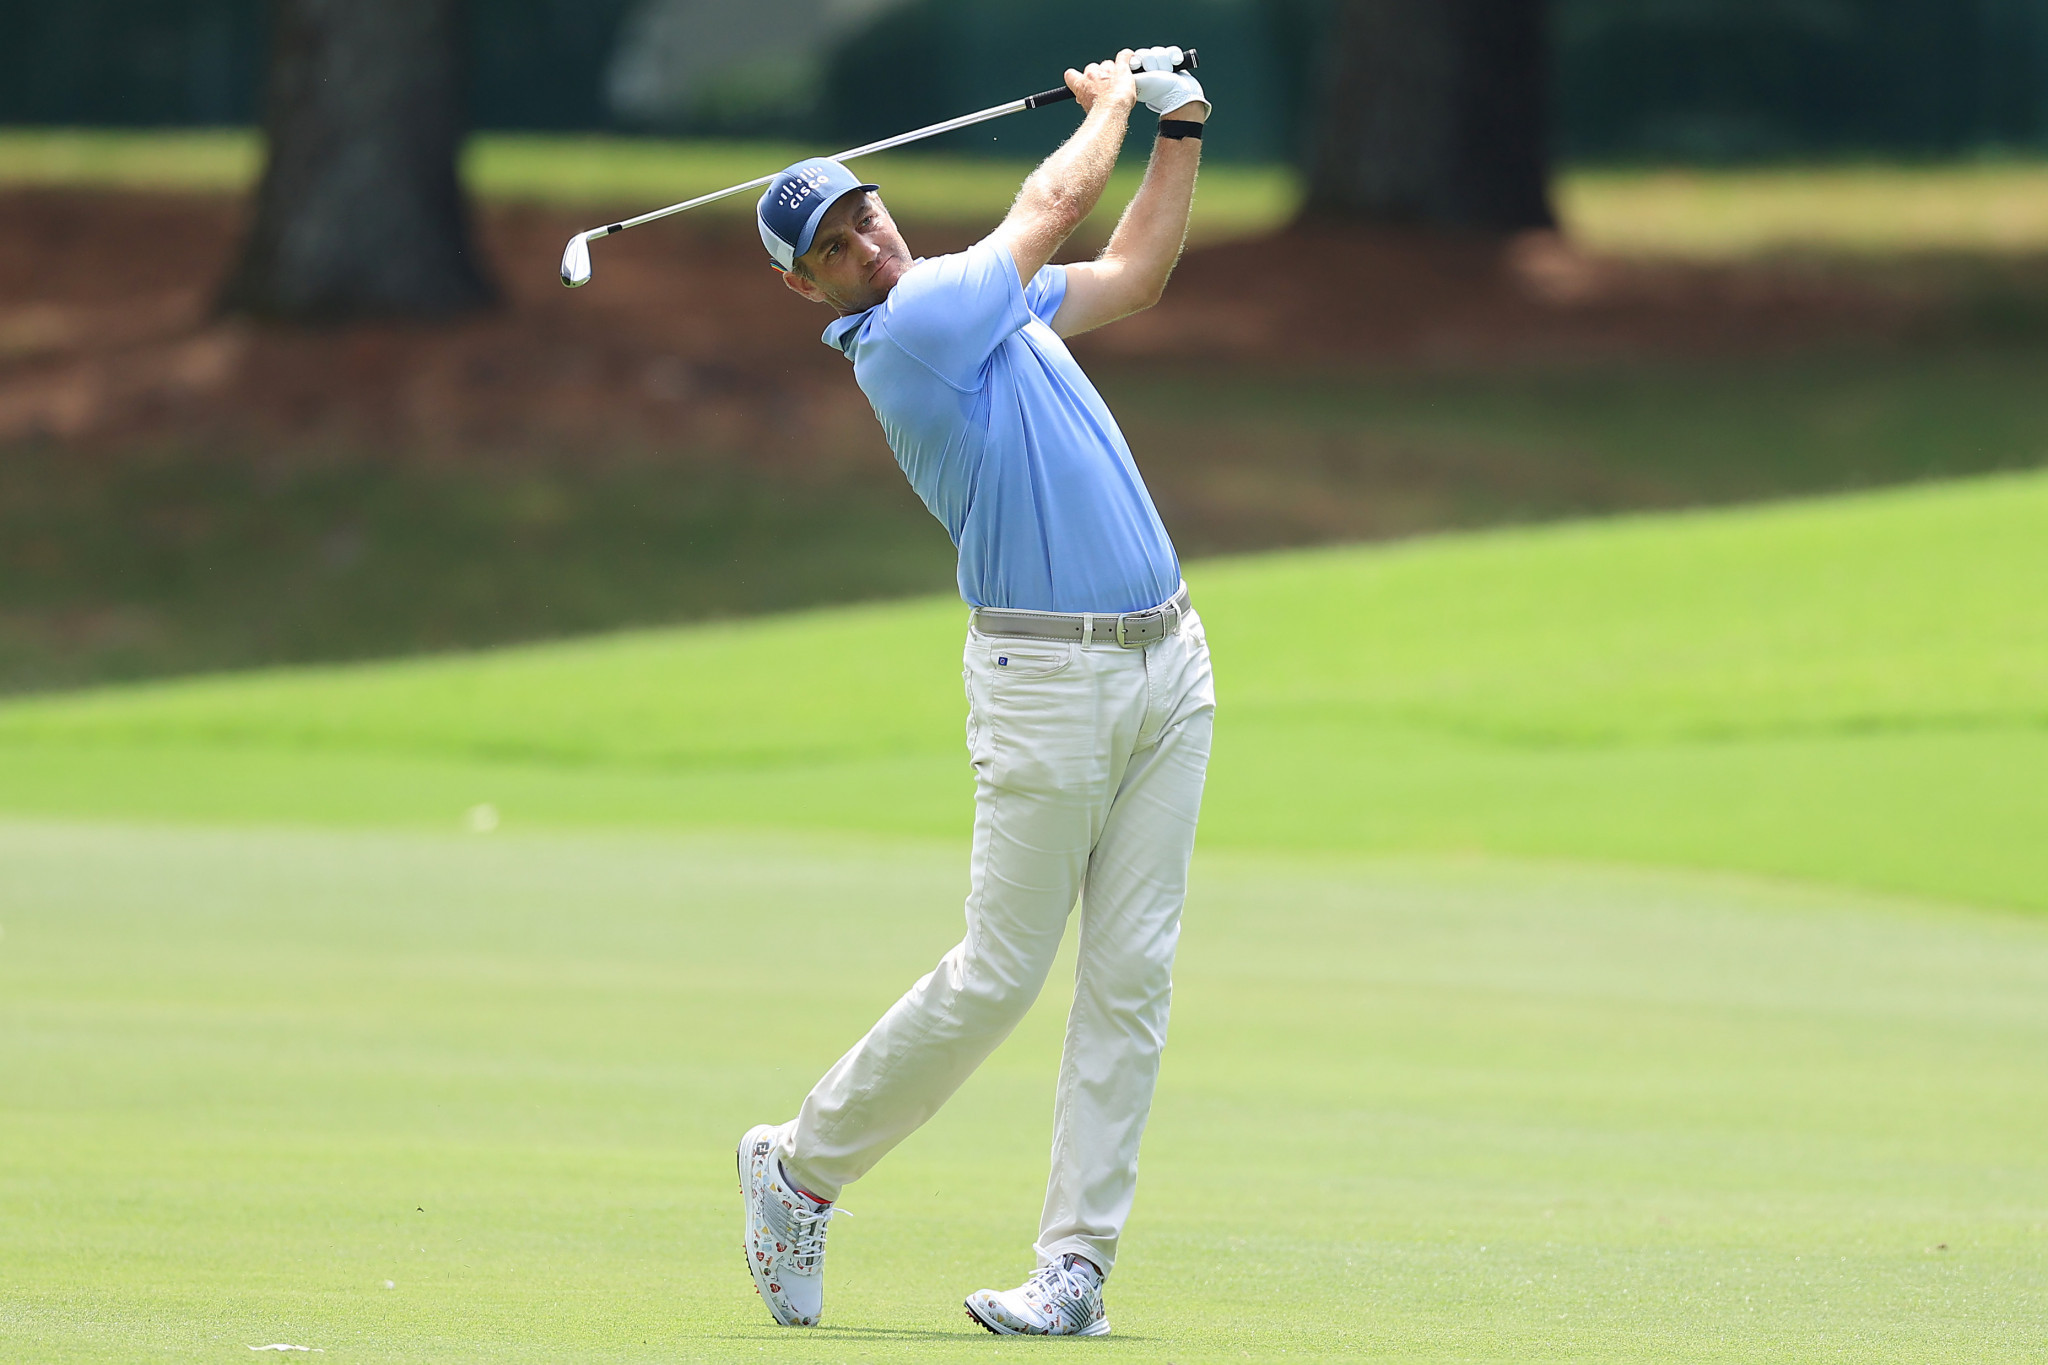 American Todd holds two-shot lead at halfway point of WGC-FedEx St. Jude Invitational